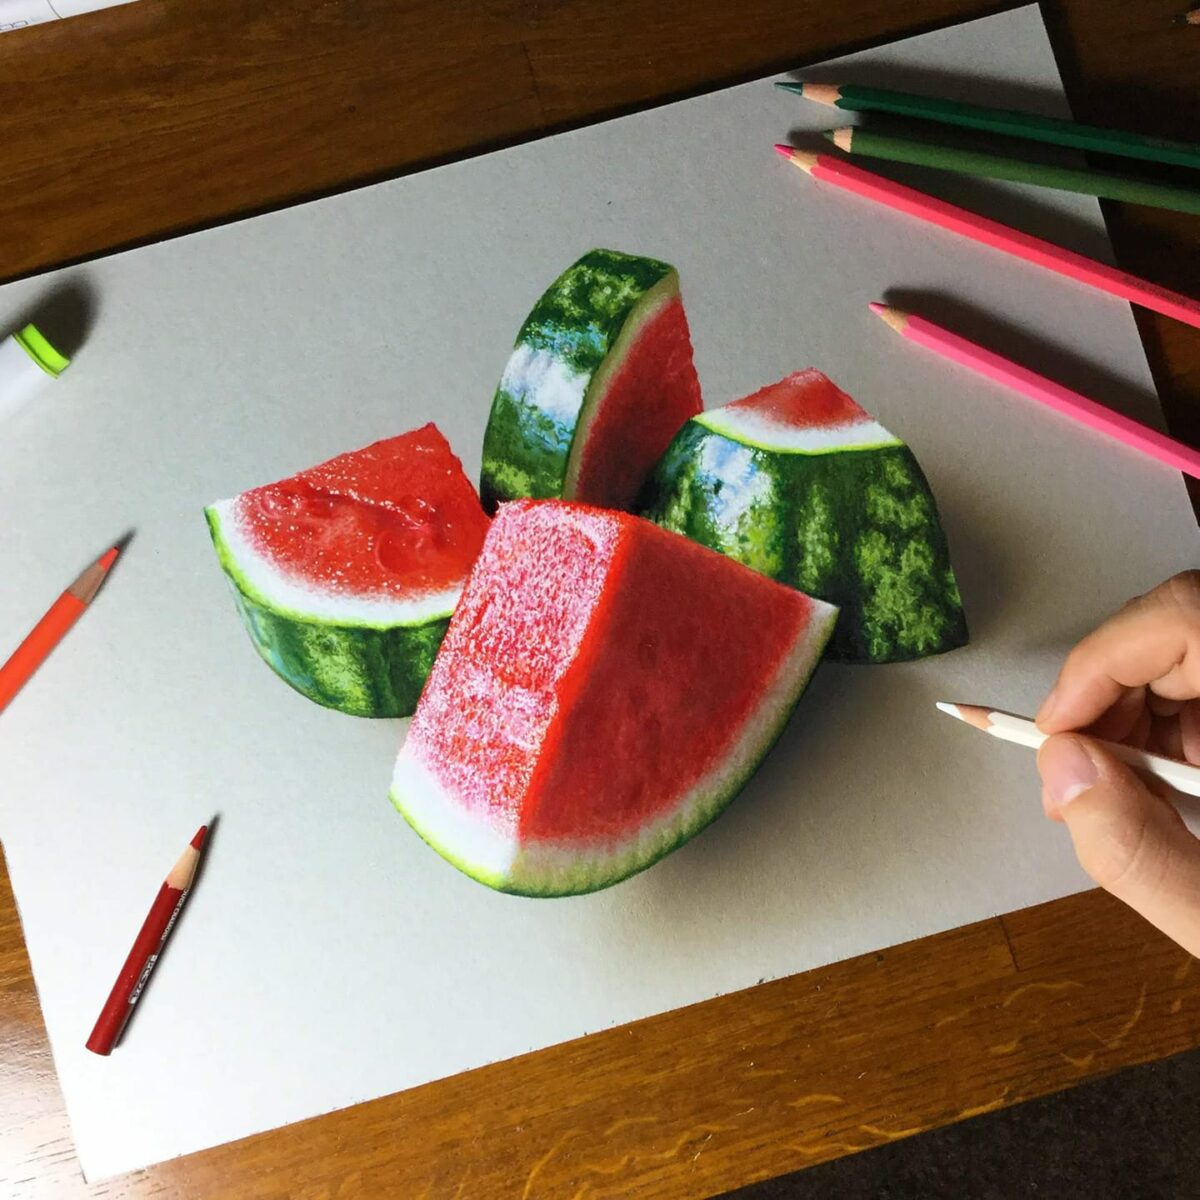 Impressive photo-realistic drawings with 3D effects by Marcello Barenghi